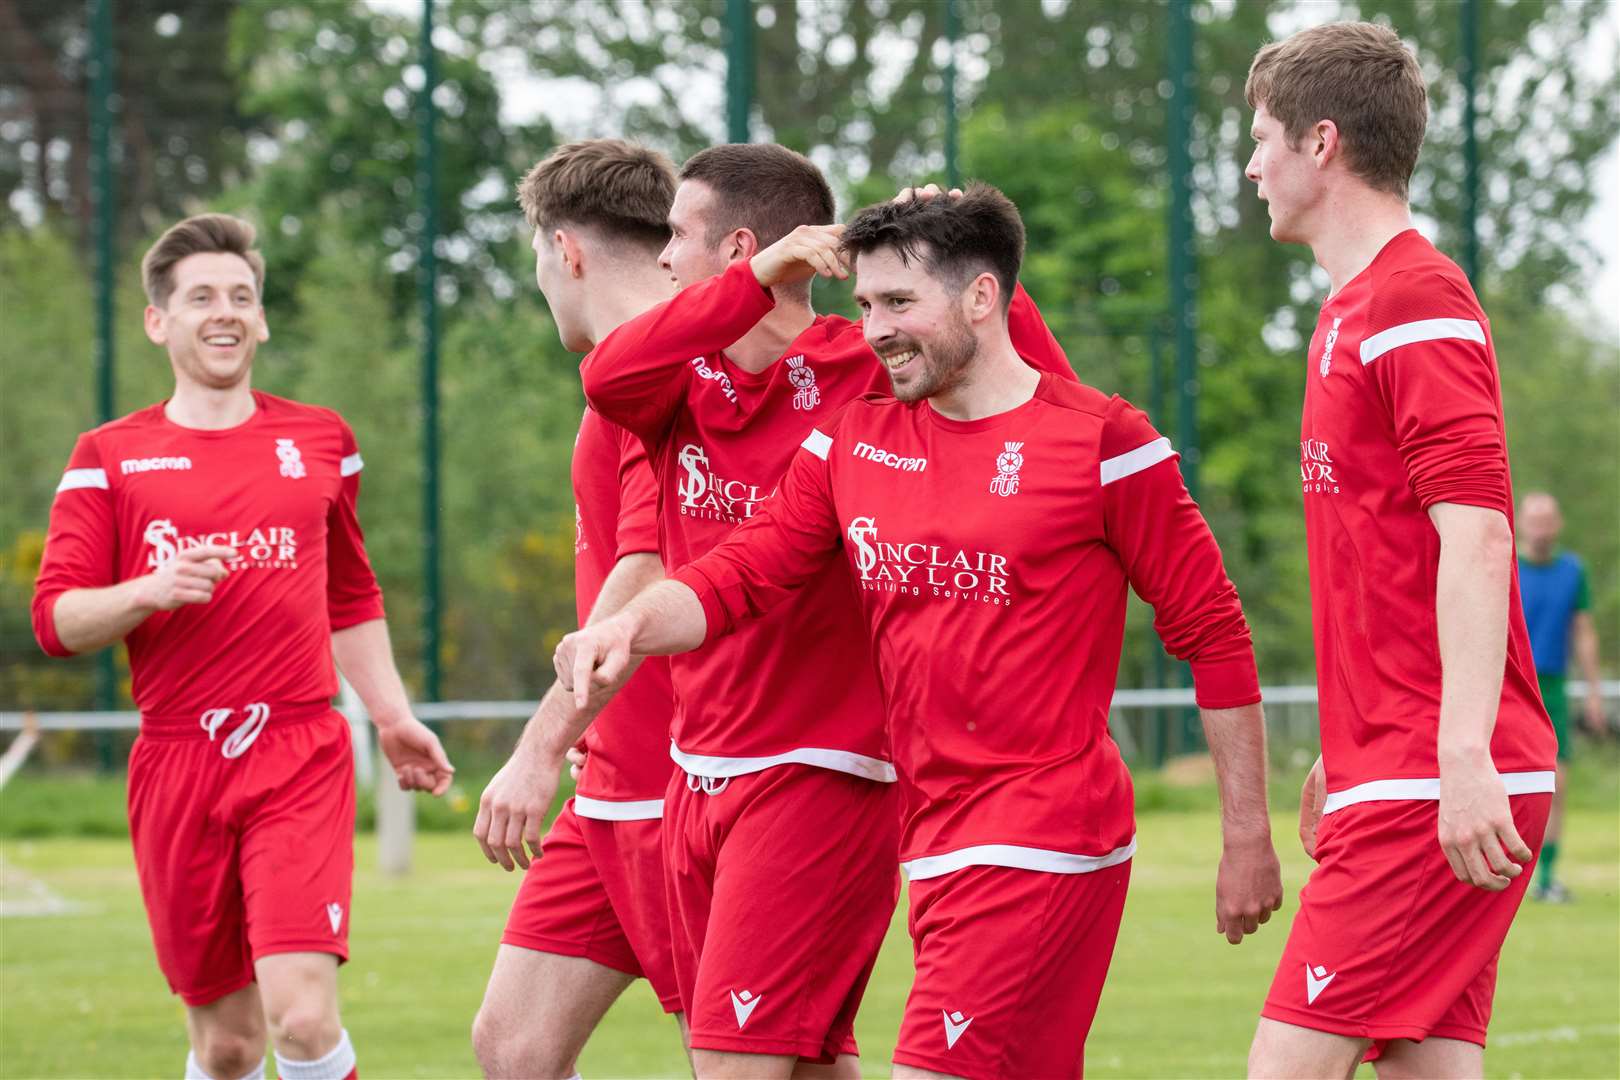 Forres Thistle's Matthew Fraser celebrates his goal after he makes it 1-1 in the first half...Dufftown FC (2) vs Forres Thistle FC (2) - Dufftown FC win 5-3 on penalties - Elginshire Cup Final held at Logie Park, Forres 14/05/2022...Picture: Daniel Forsyth..